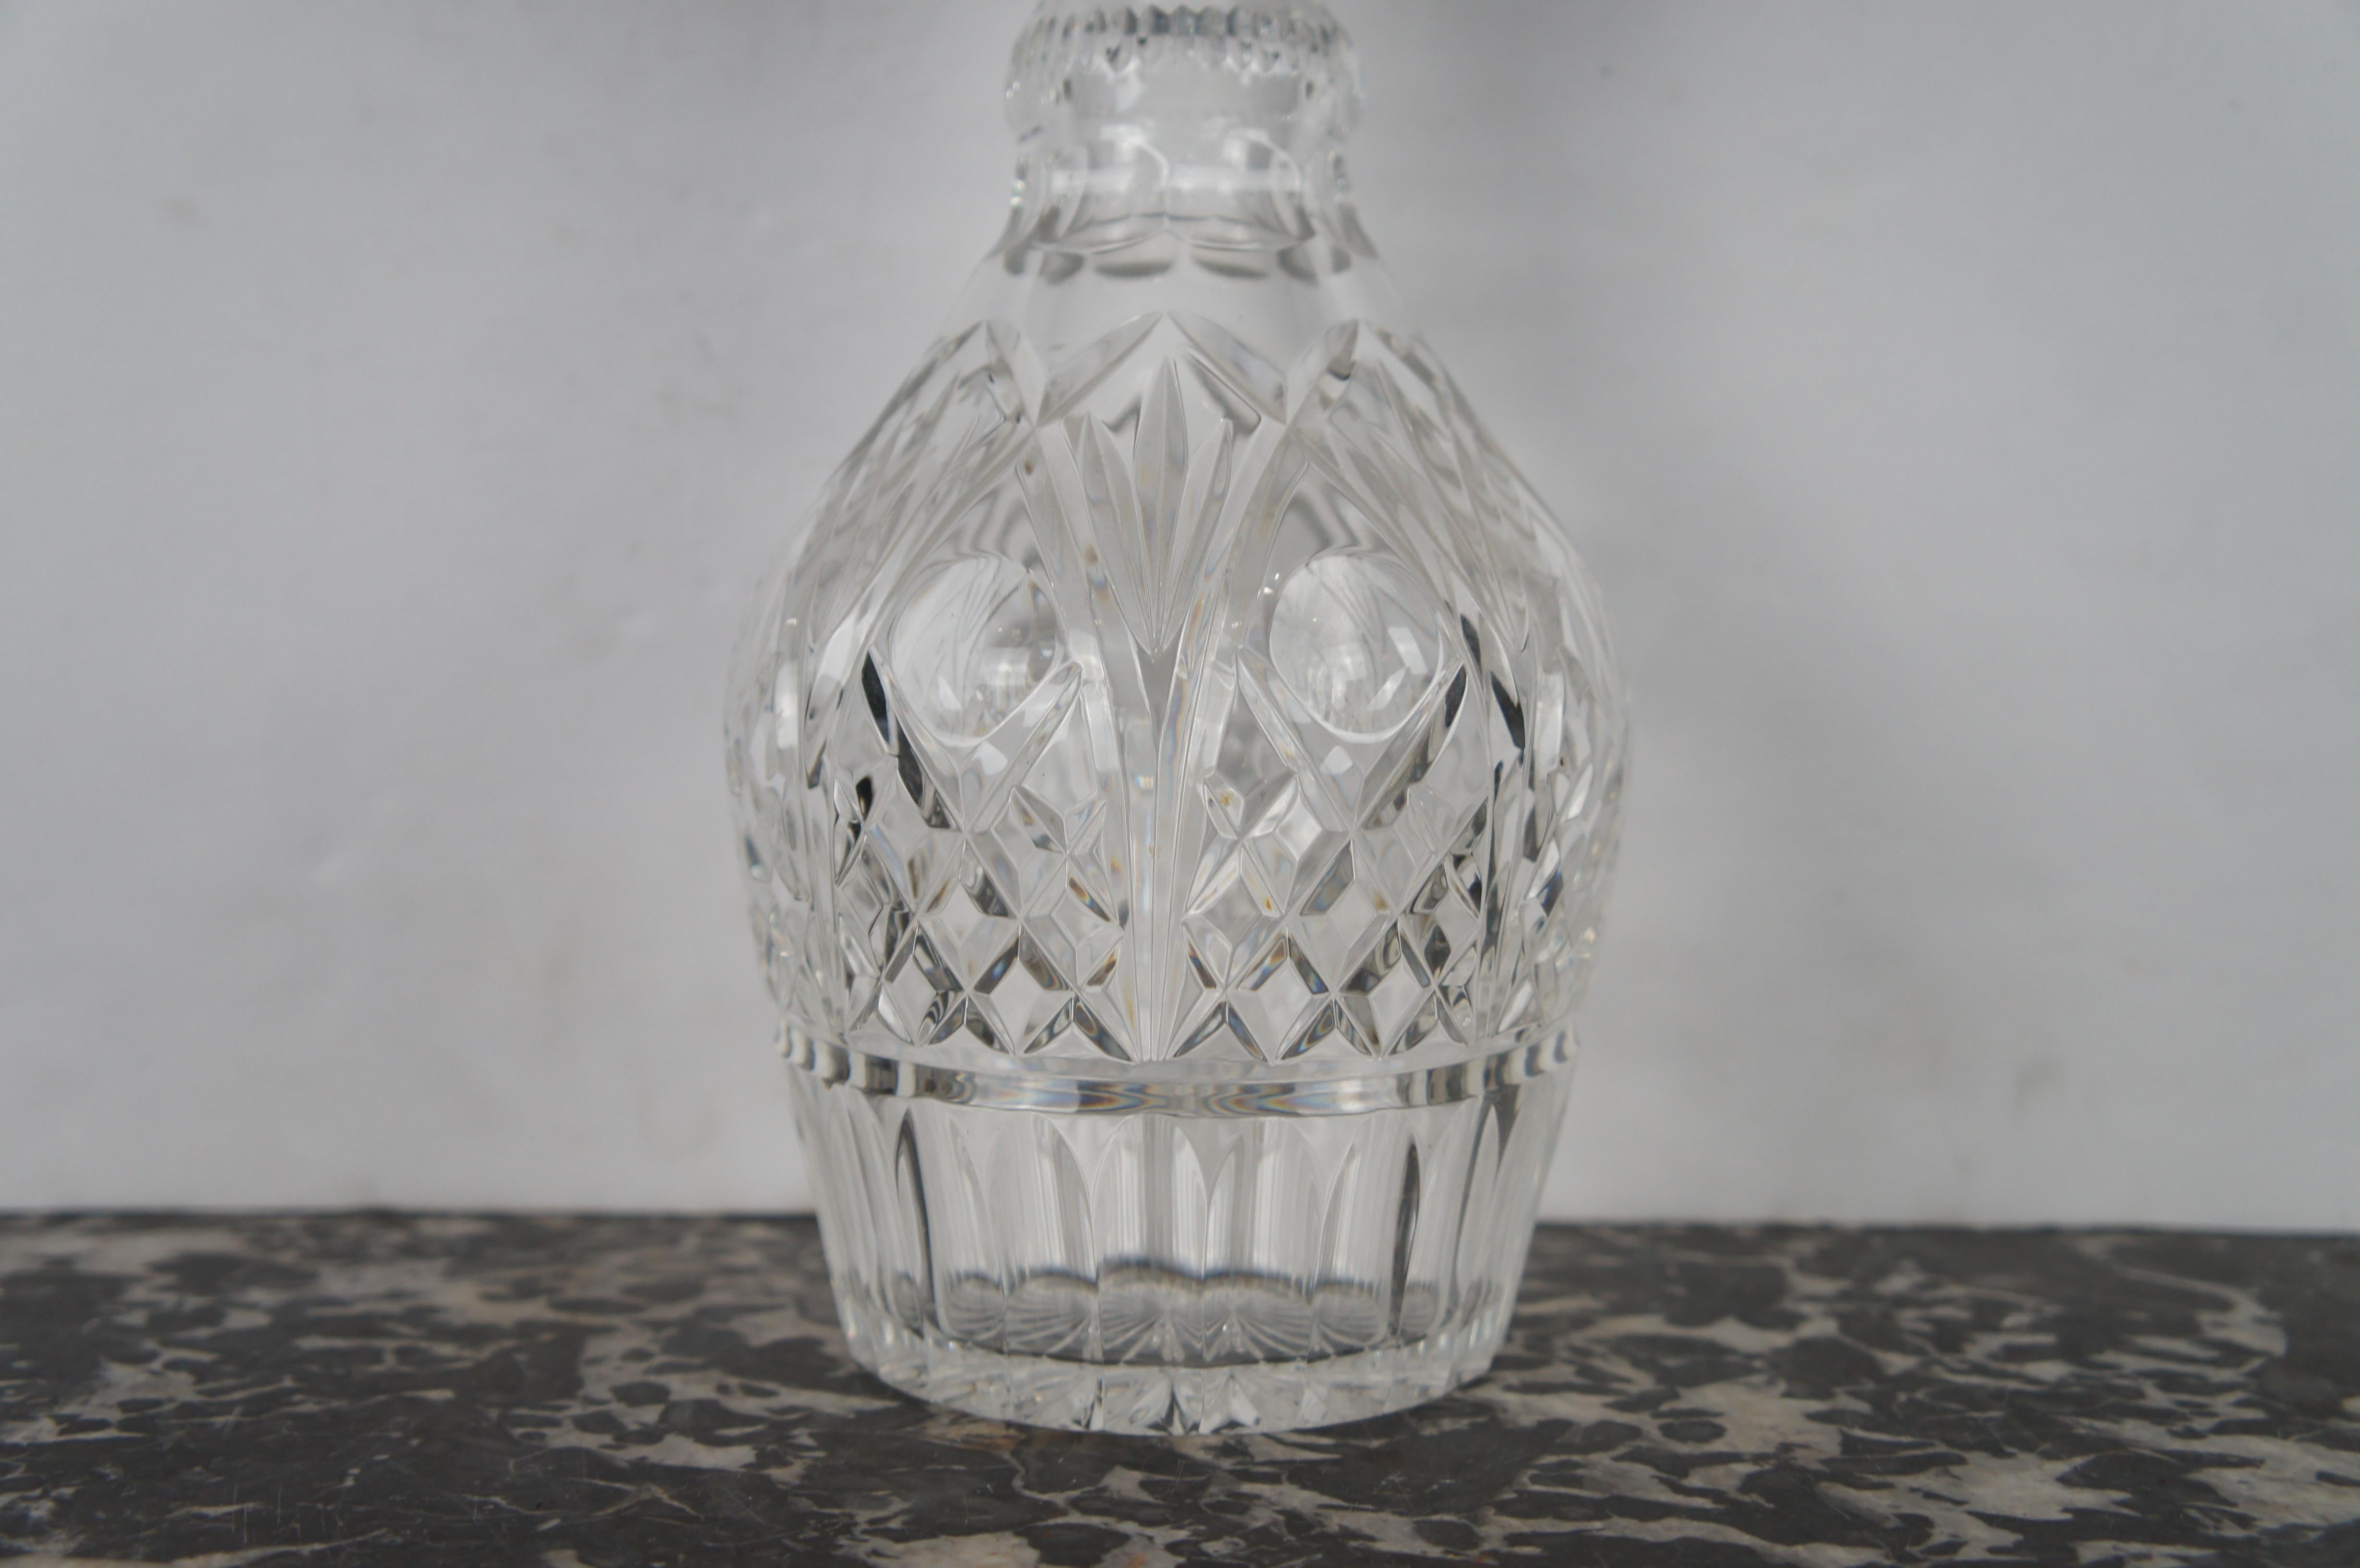 Waterford Irish Crystal Meagher Cut Glass Wine Spirit Decanter & Stopper 12